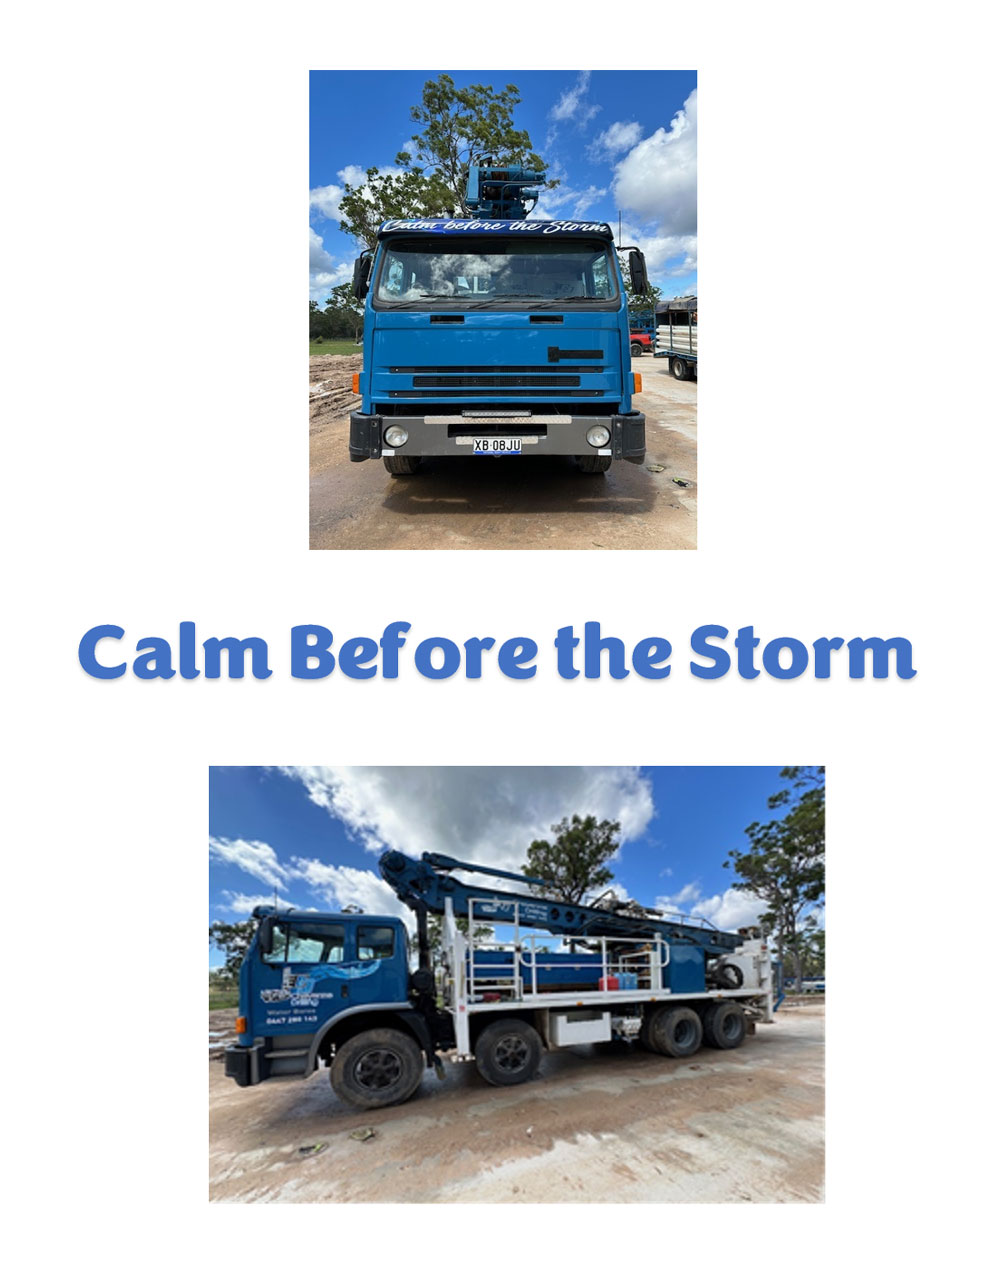 Two Images of Blue Trucks with The Title "calm Before the Storm": The Top Shows a Stationary Cabin Truck, the Bottom Features a Truck with Mounted Equipment, Under a Cloudy Sky — Bore Drilling in Bundaberg, QLD